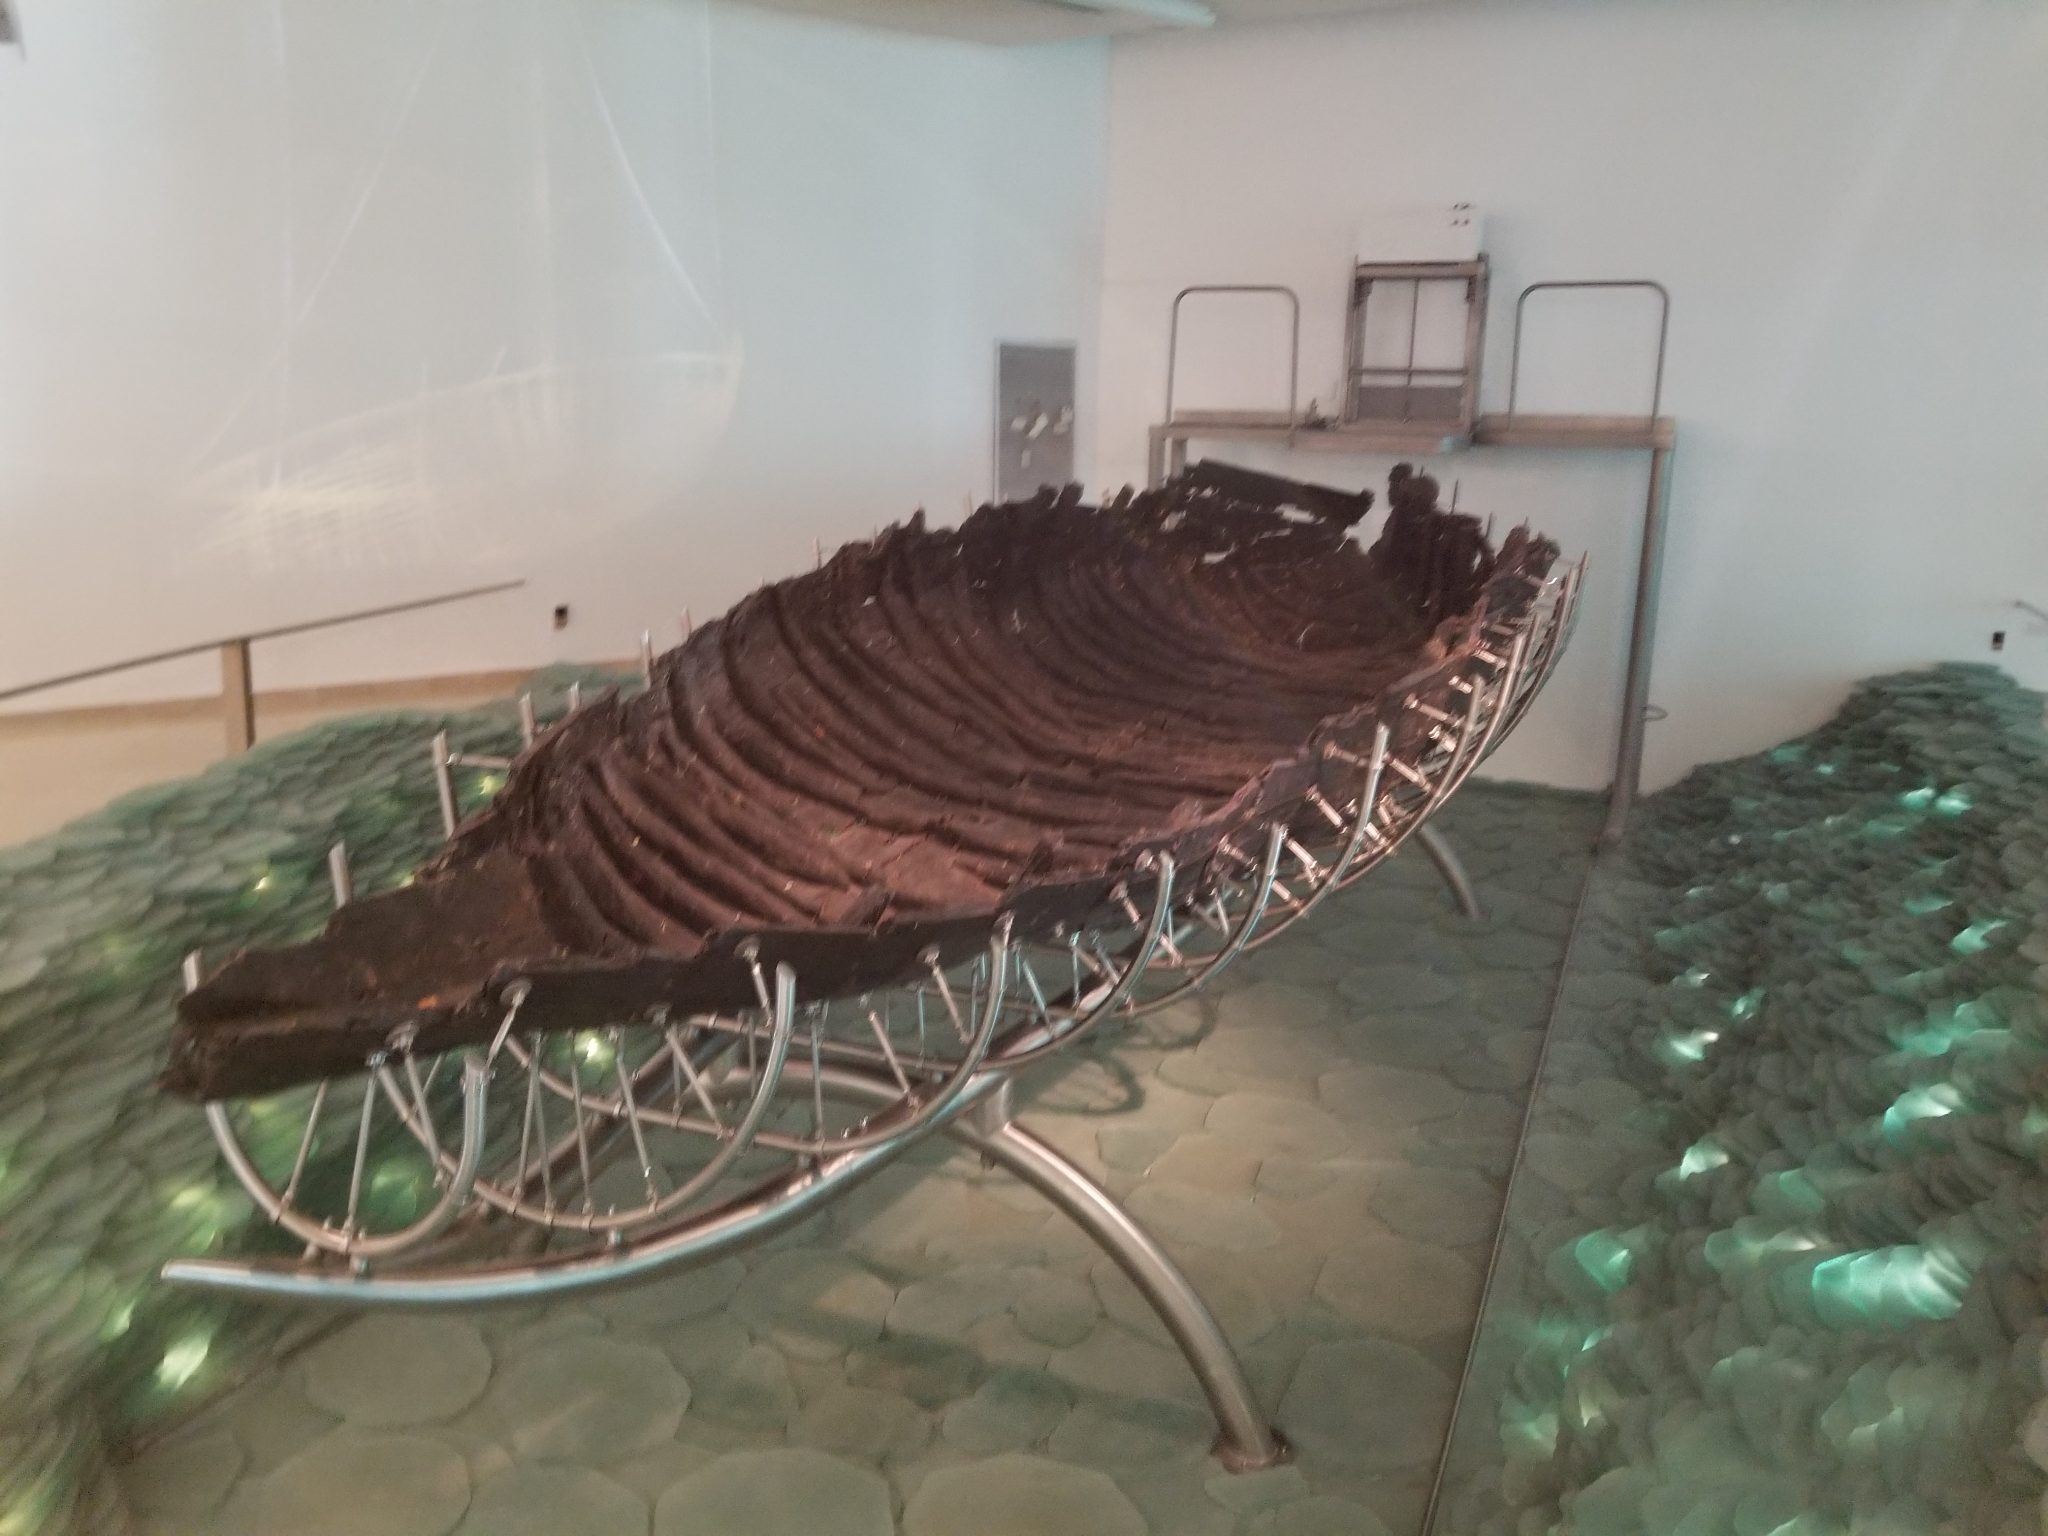 Ancient Galilee Boat, also known as the Jesus Boat,